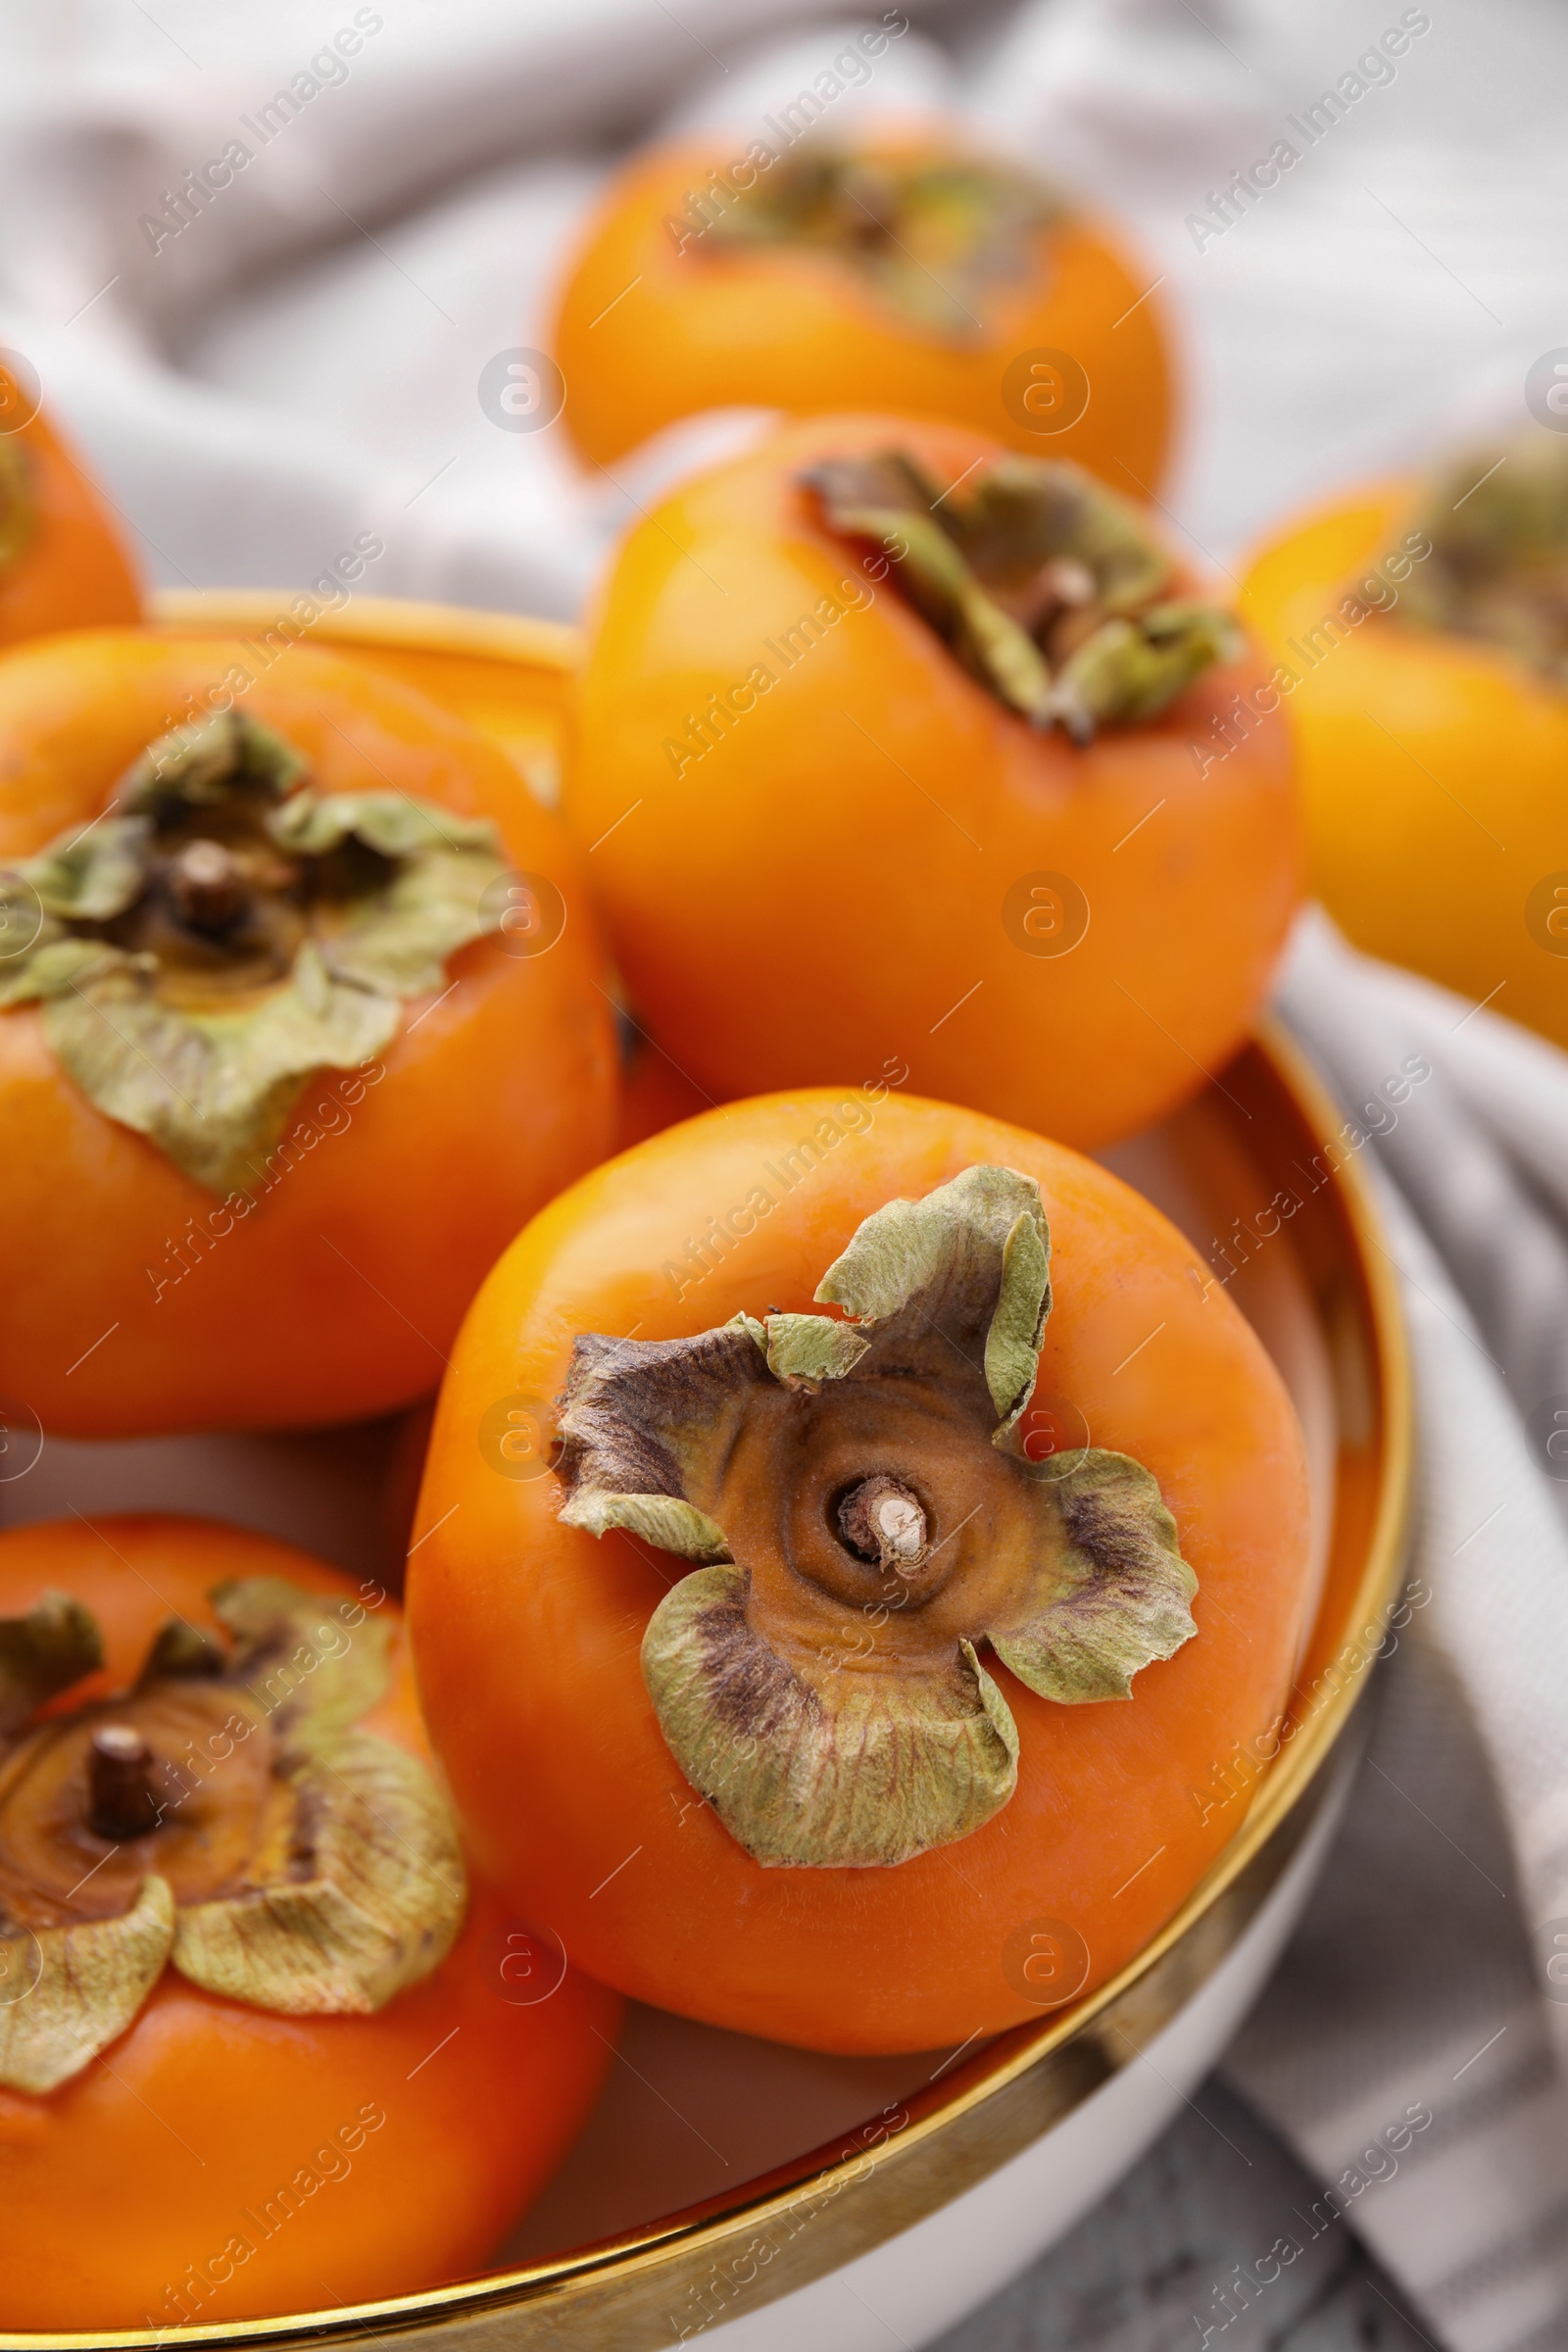 Photo of Bowl with delicious ripe juicy persimmons, closeup